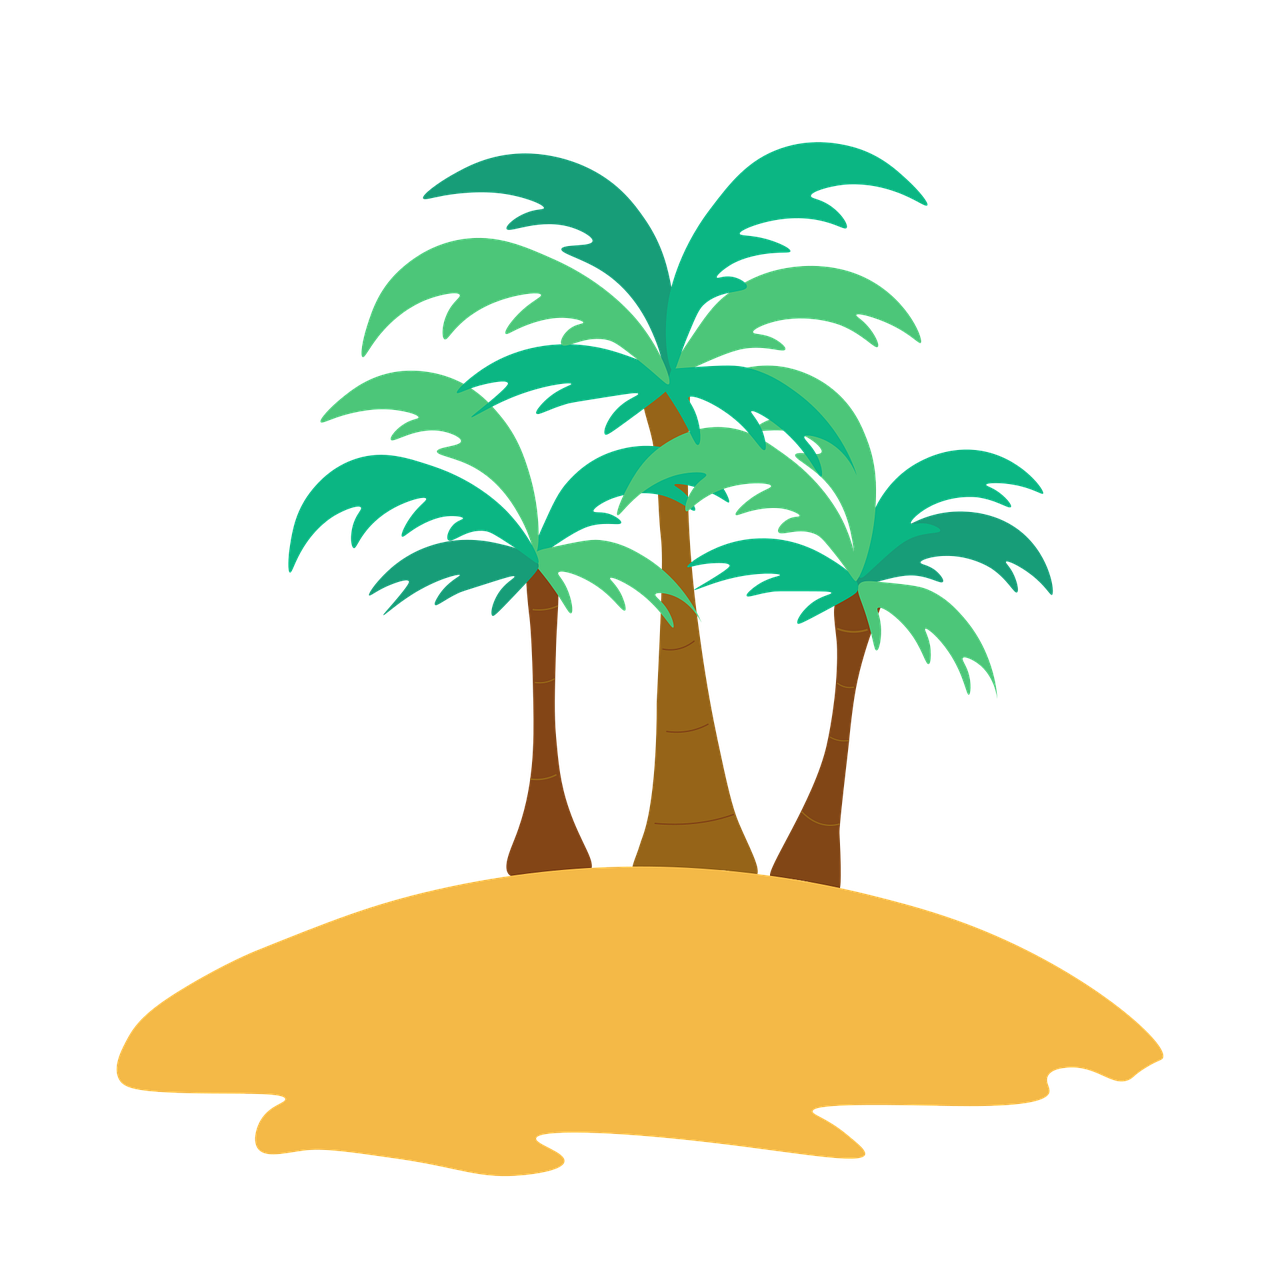 Beach Coconut Tree PNG Images Transparent Background | PNG Play